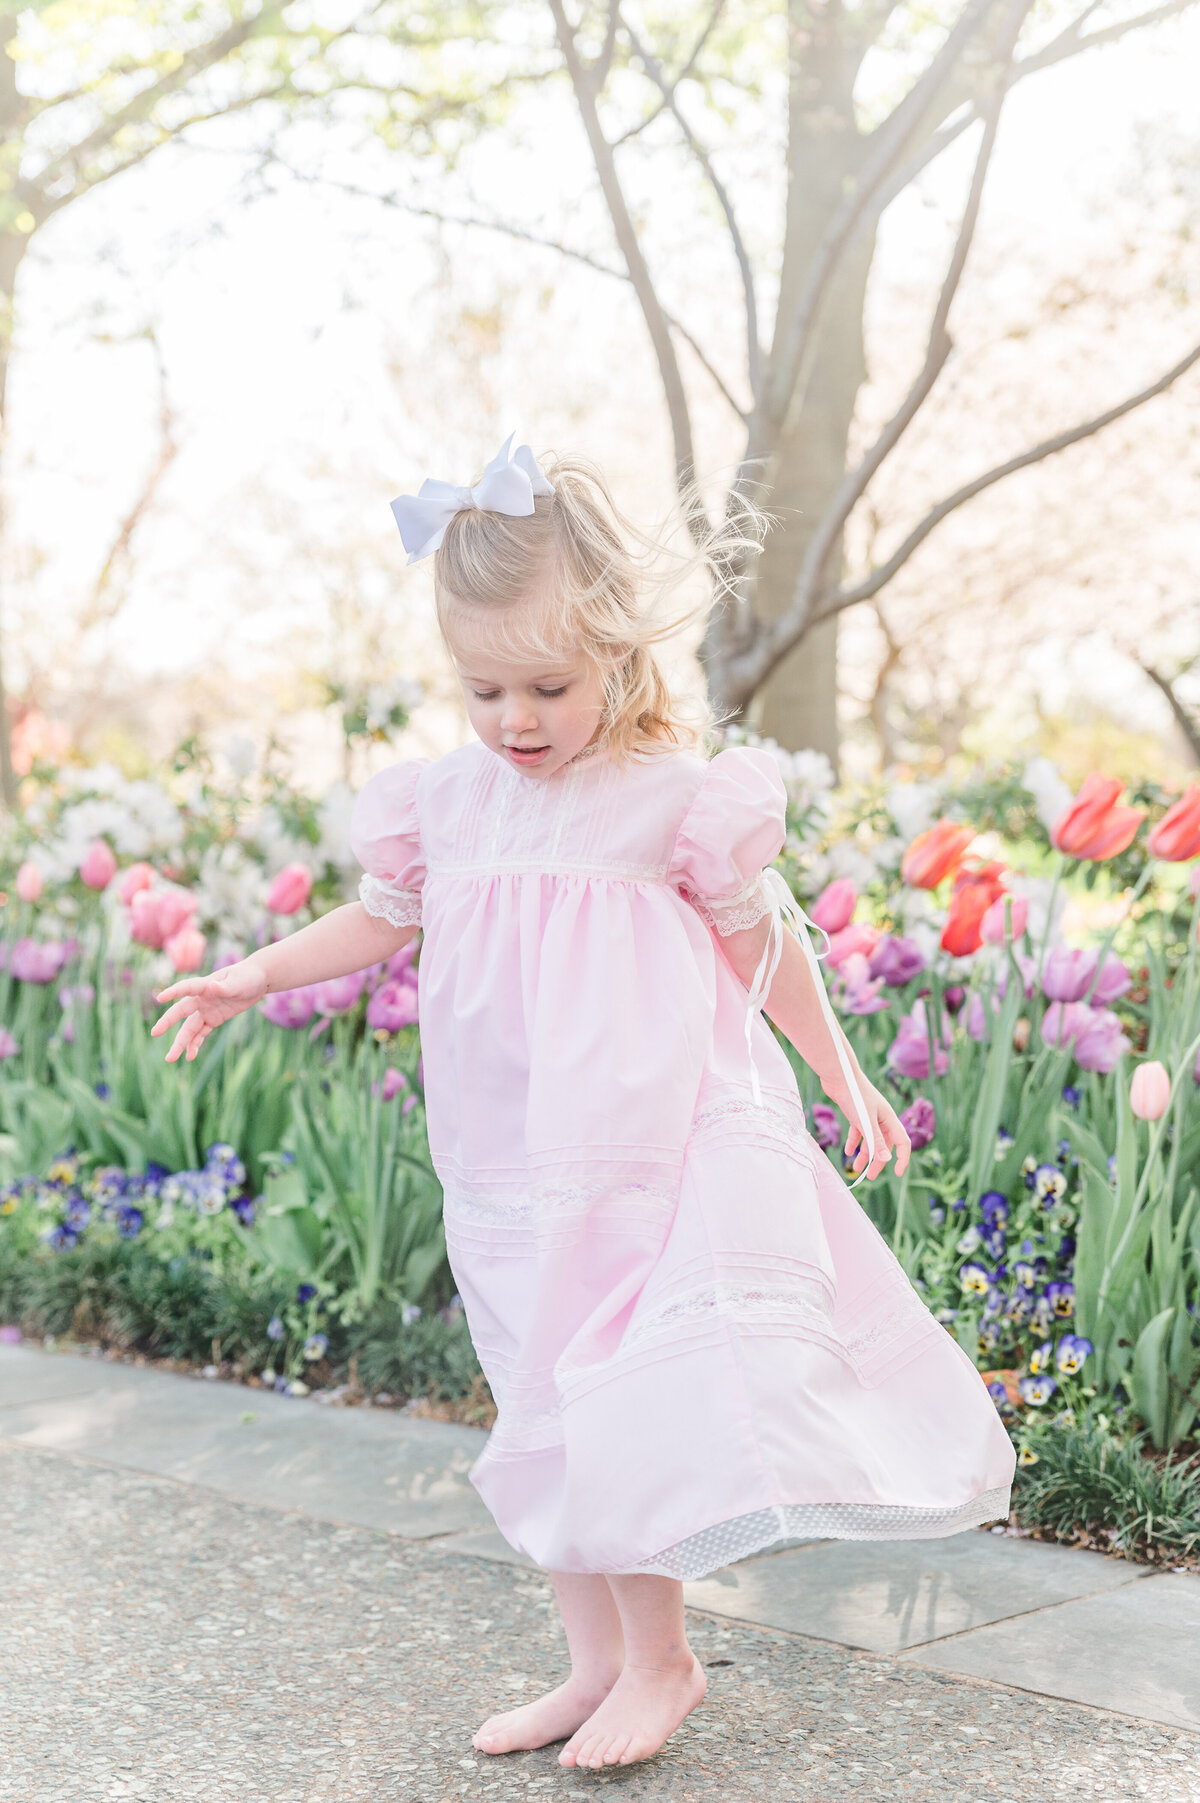 Preschool aged girl dancing in a pink heirloom dress at the Dallas Arboretum in front of tulips.